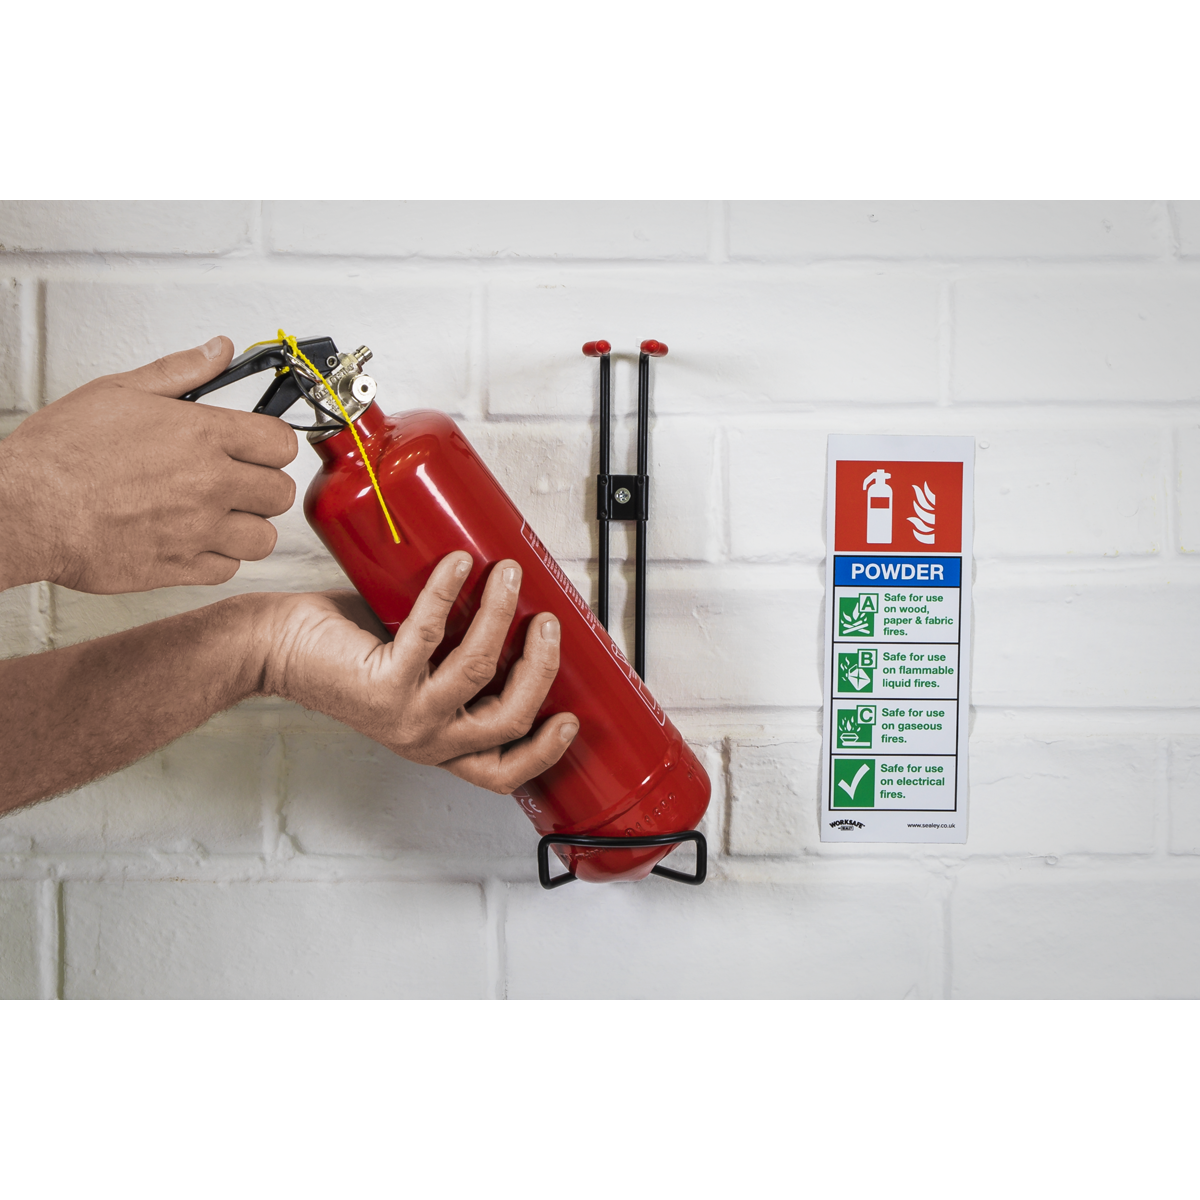 Safe Conditions Safety Sign - Powder Fire Extinguisher - Self-Adhesive Vinyl